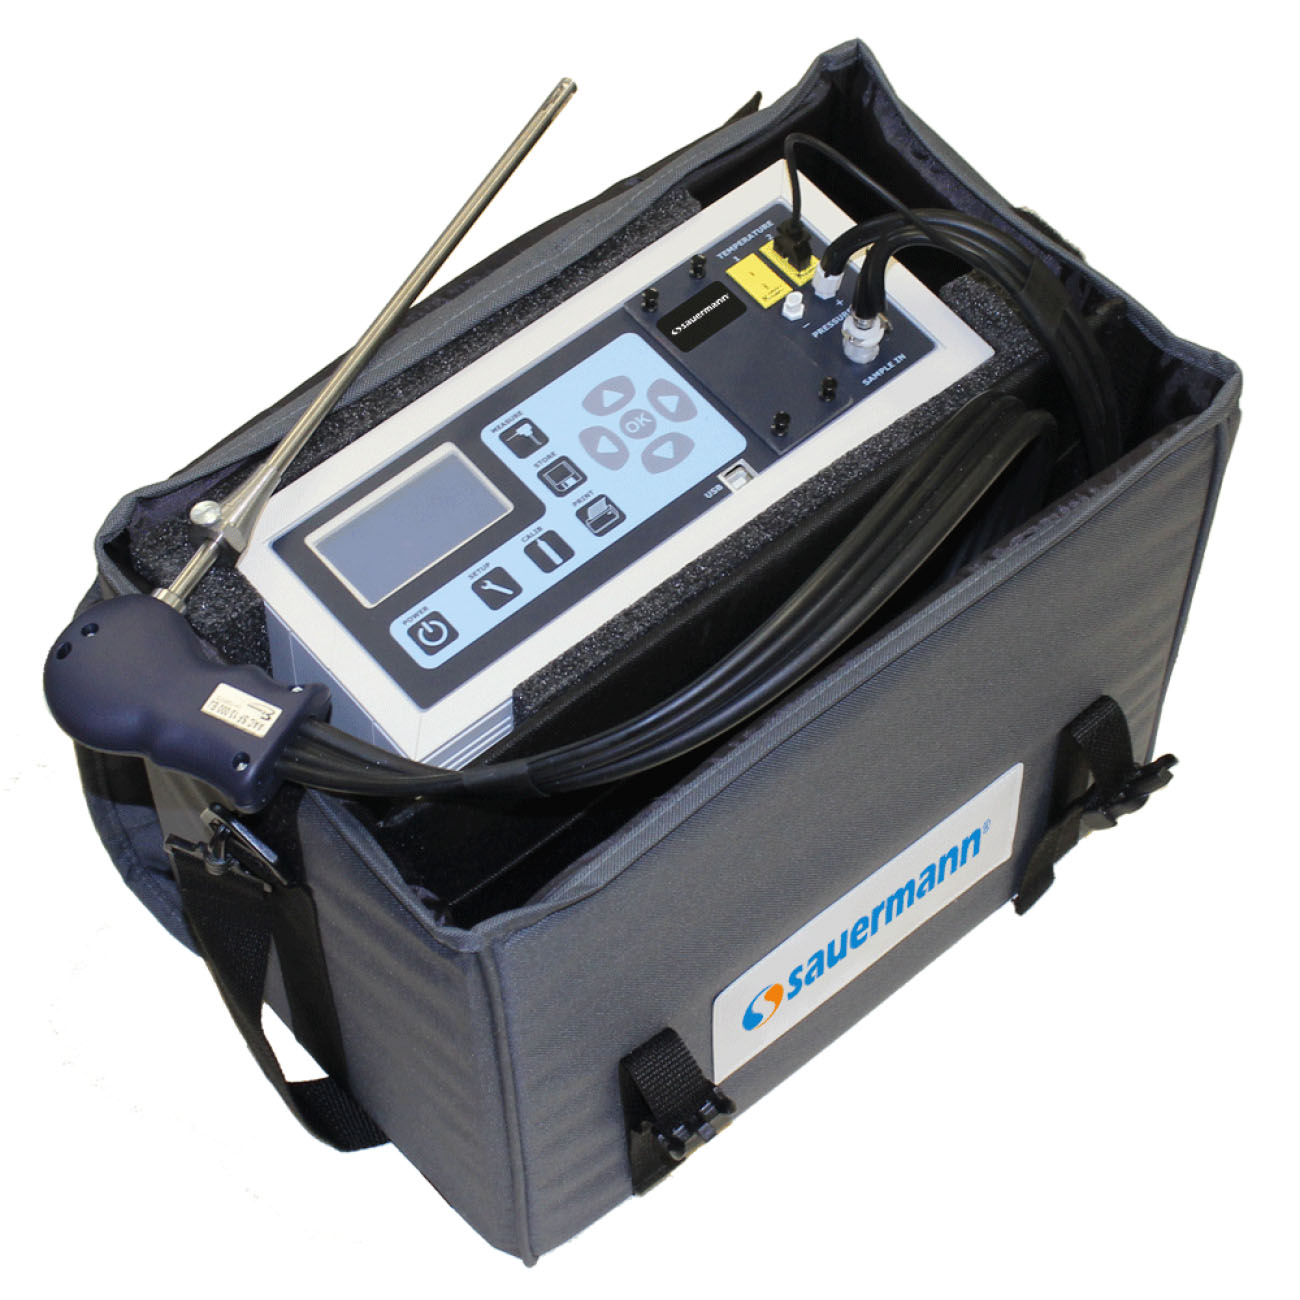 Si-CA?8500 Portable Industrial Combustion Flue Gas & Emissions Analyzer